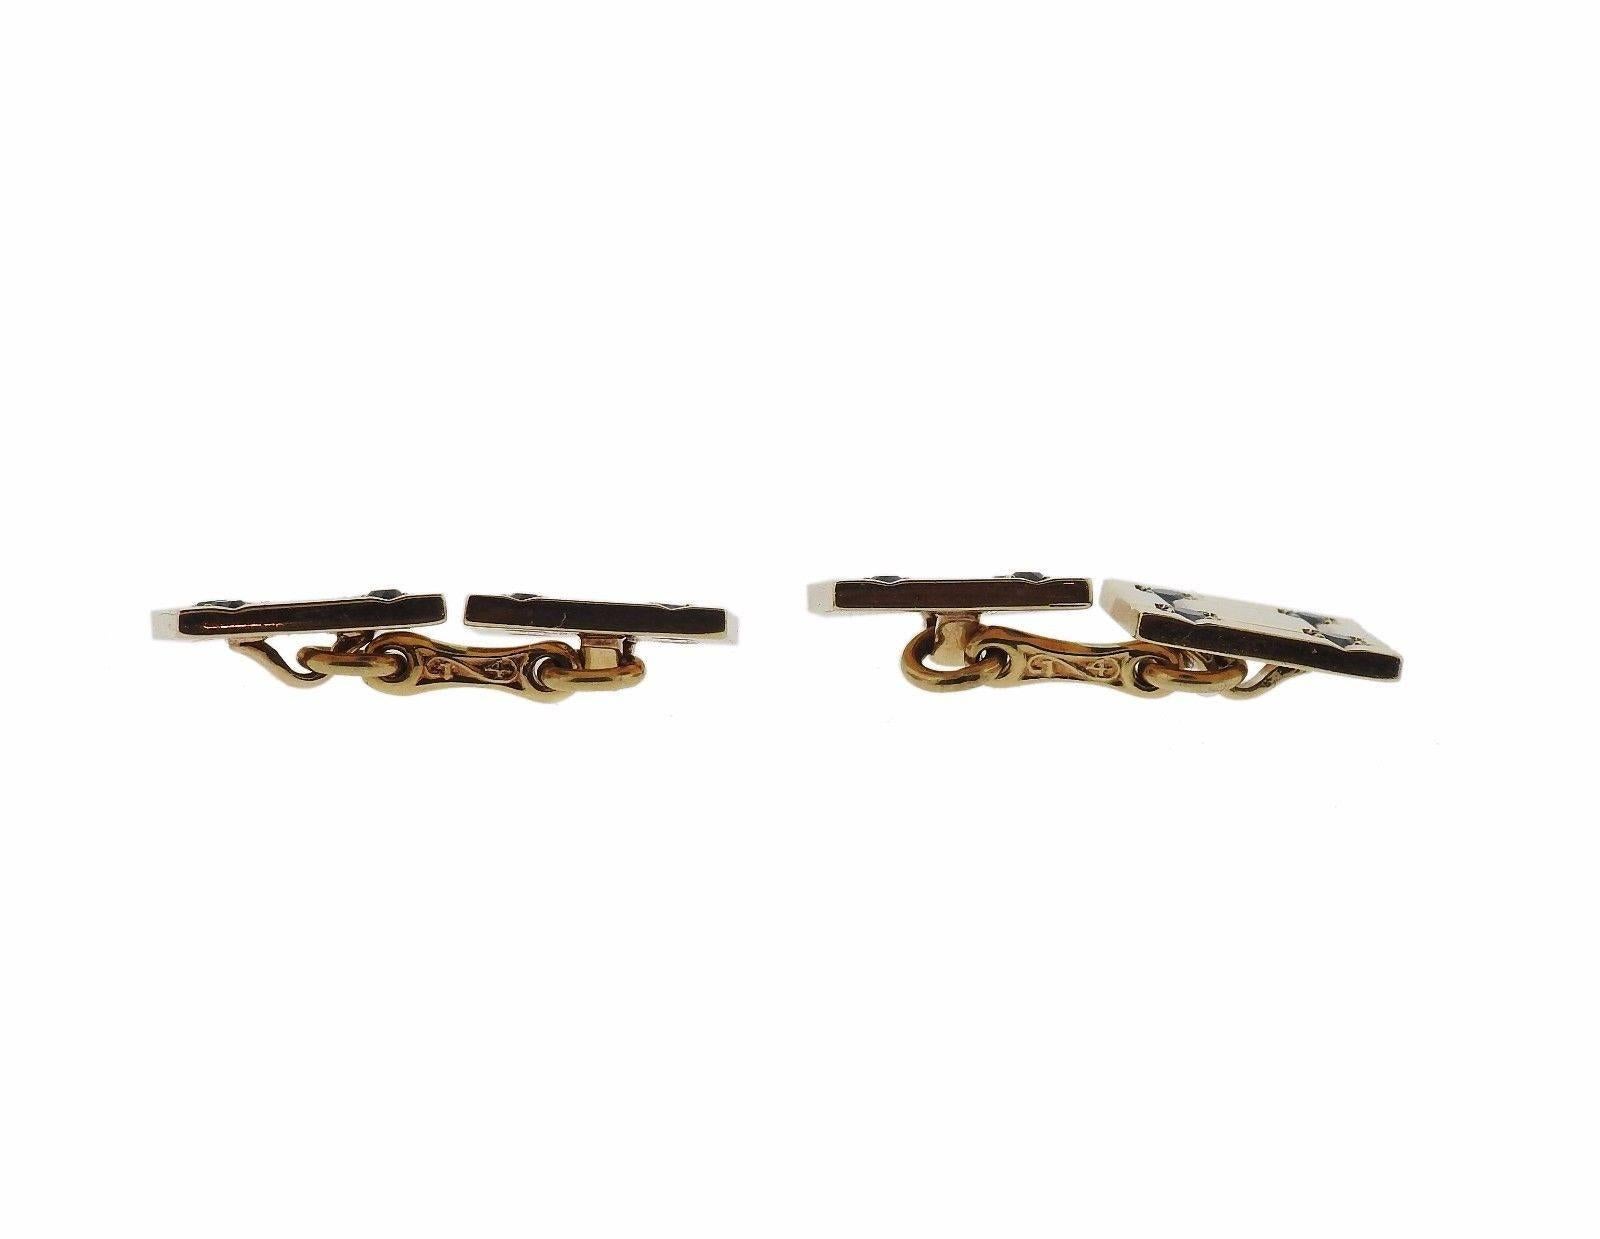 A pair of 14k yellow gold cufflinks set with sapphires.  The cufflinks measure 12.5mm x 12.5mm and weigh 13.7 grams.  Marked: 14k, Tiffany & Co.